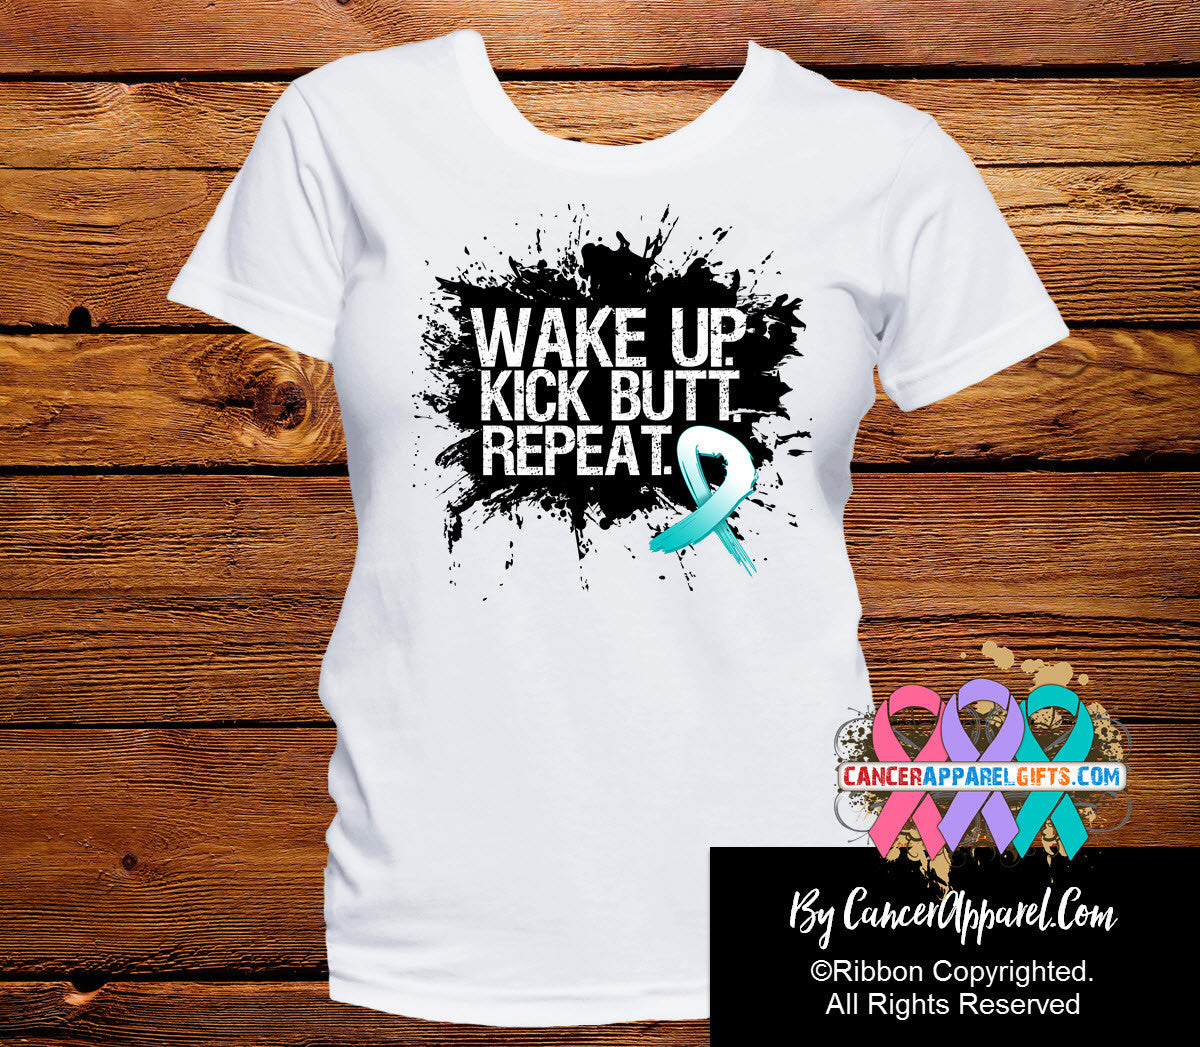 Cervical Cancer Shirts Wake Up Kick Butt and Repeat - Cancer Apparel and Gifts